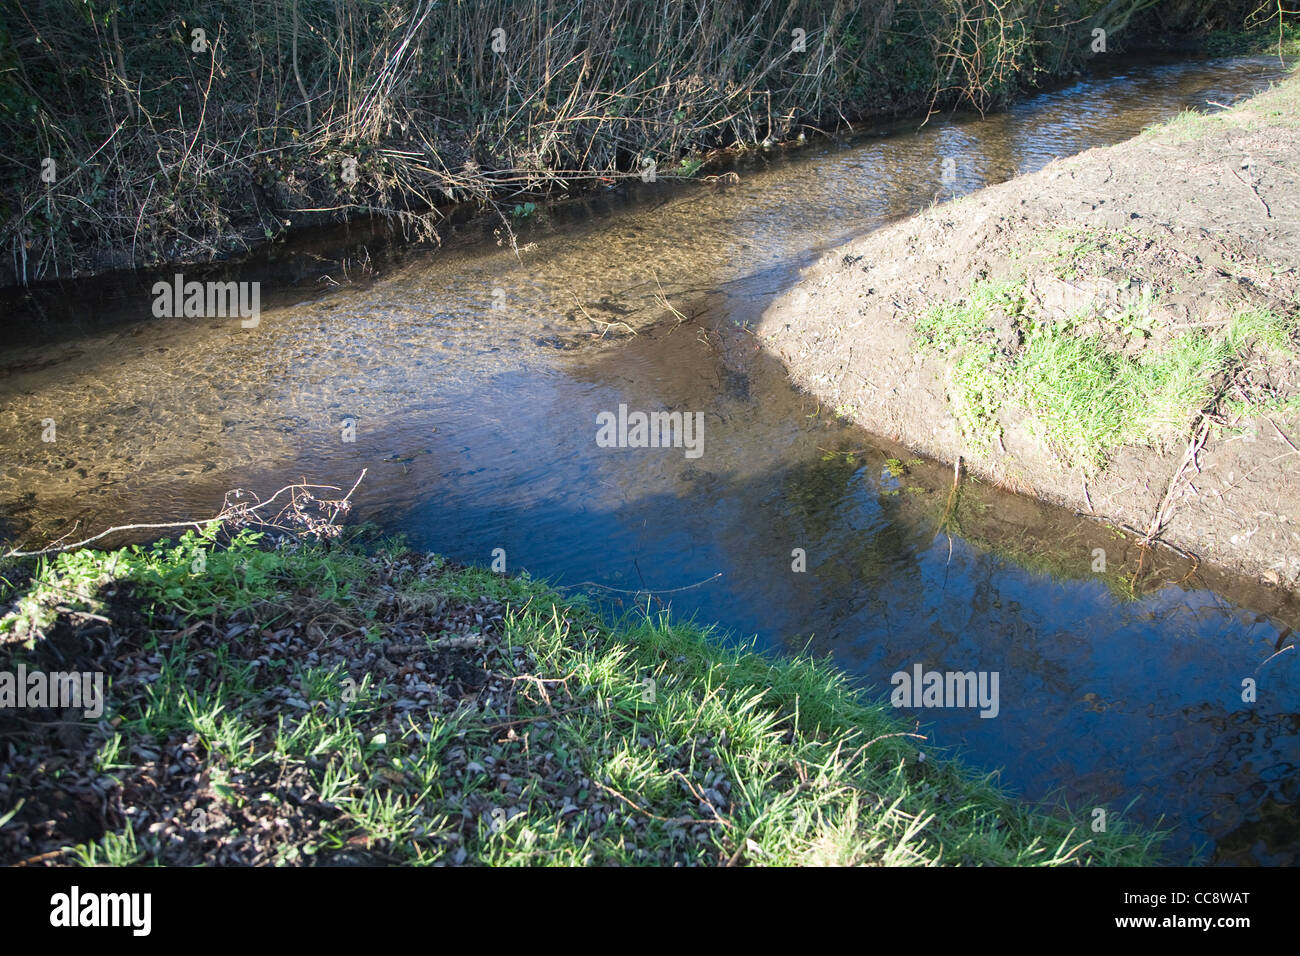 River confluence two streams meeting Stock Photo